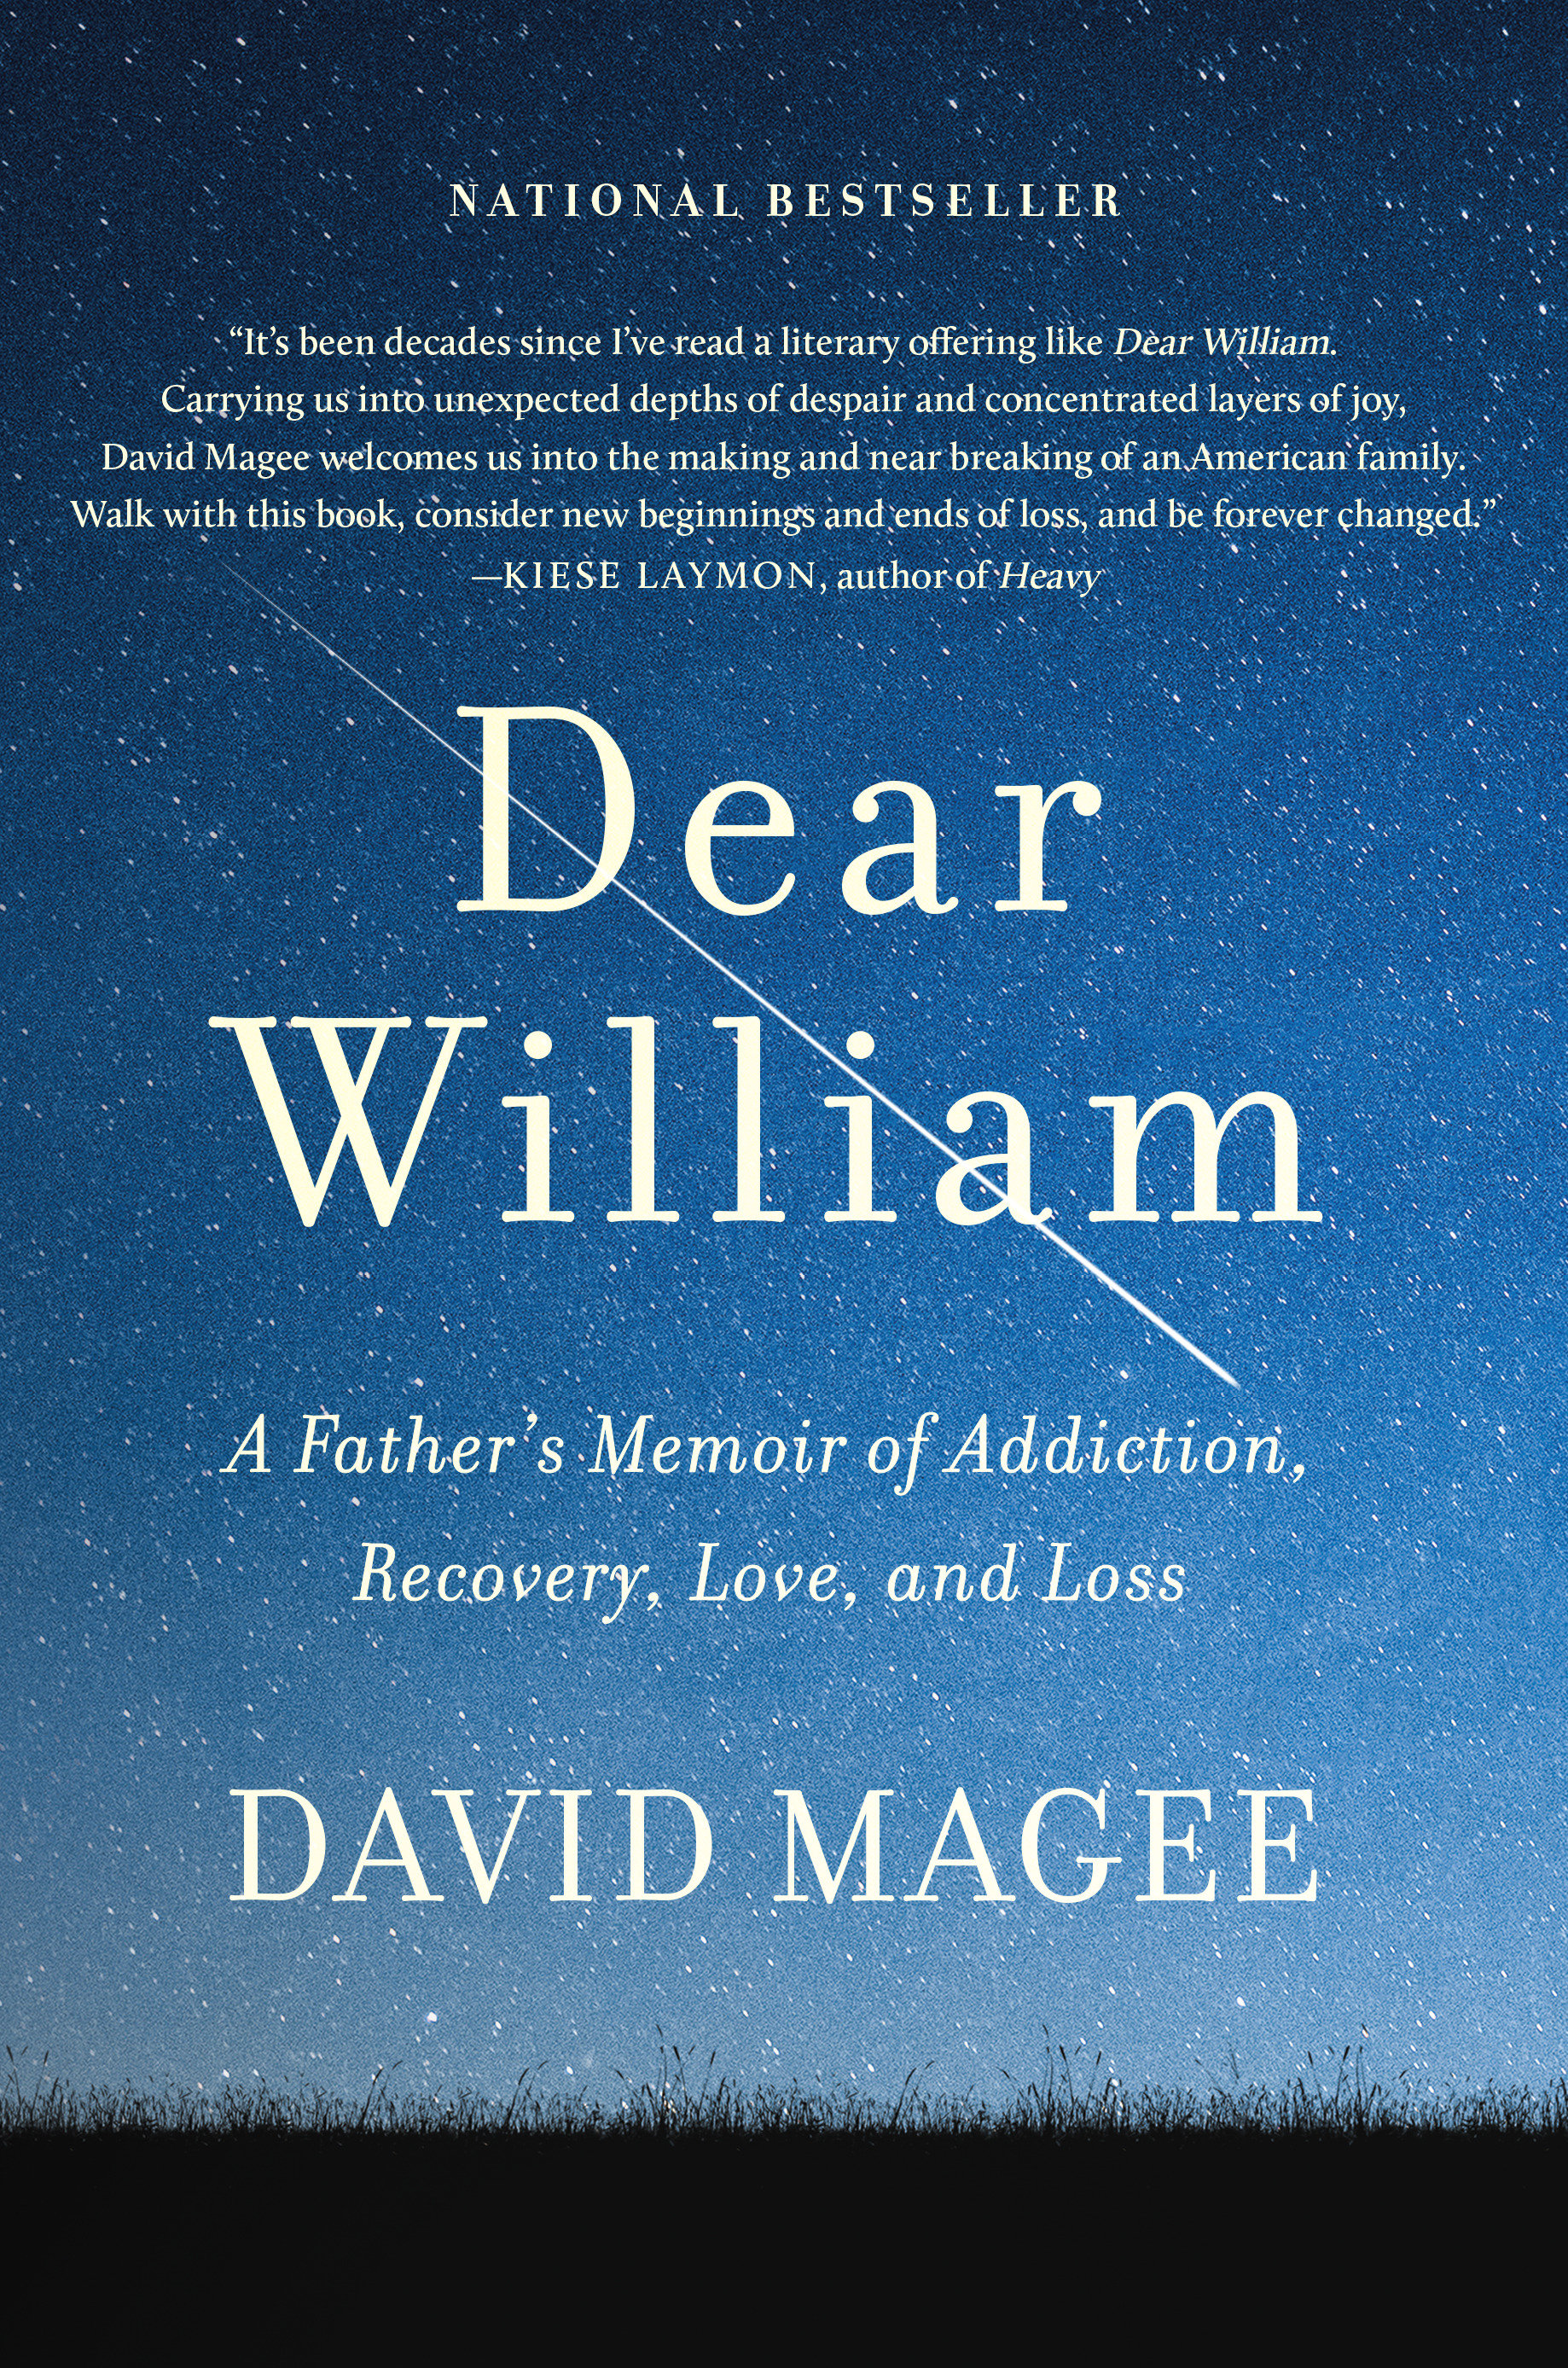 Image de couverture de Dear William [electronic resource] : A Father's Memoir of Addiction, Recovery, Love, and Loss